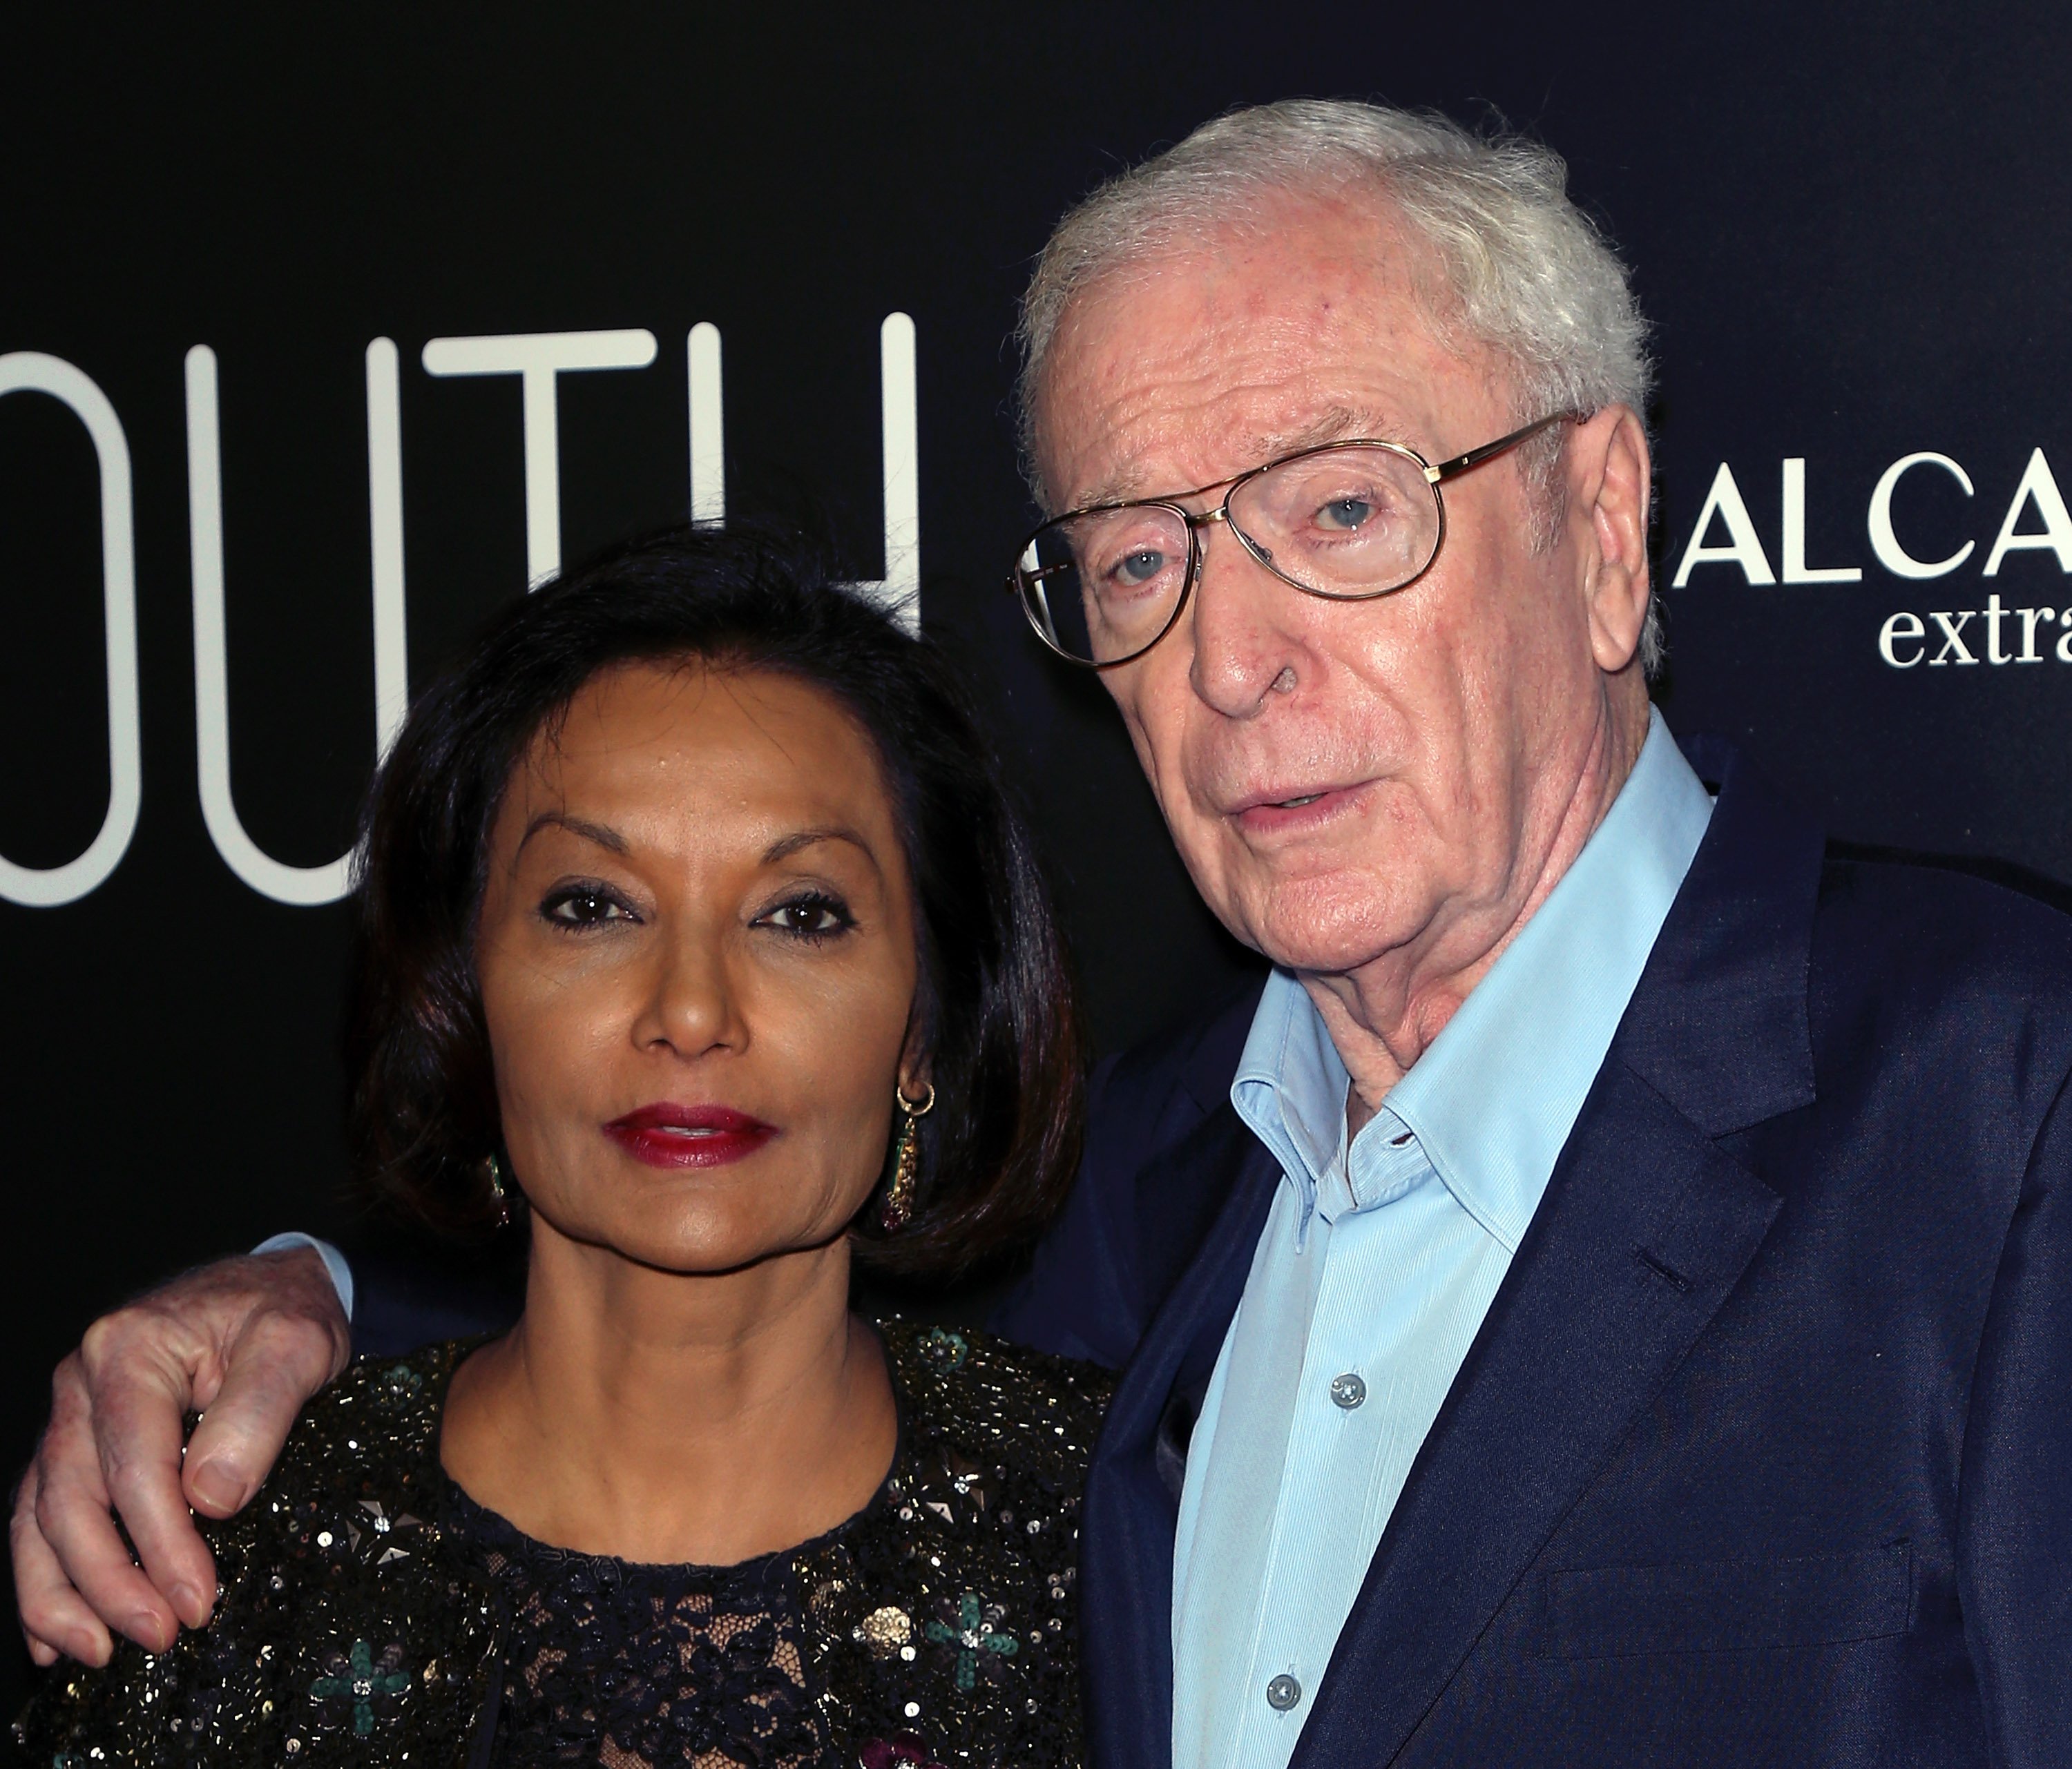 Sir Michael Caine and Shakira Caine at the "Youth" premiere at the DGA Theater in Los Angeles, California, on November 17, 2015. | Source: Getty Images